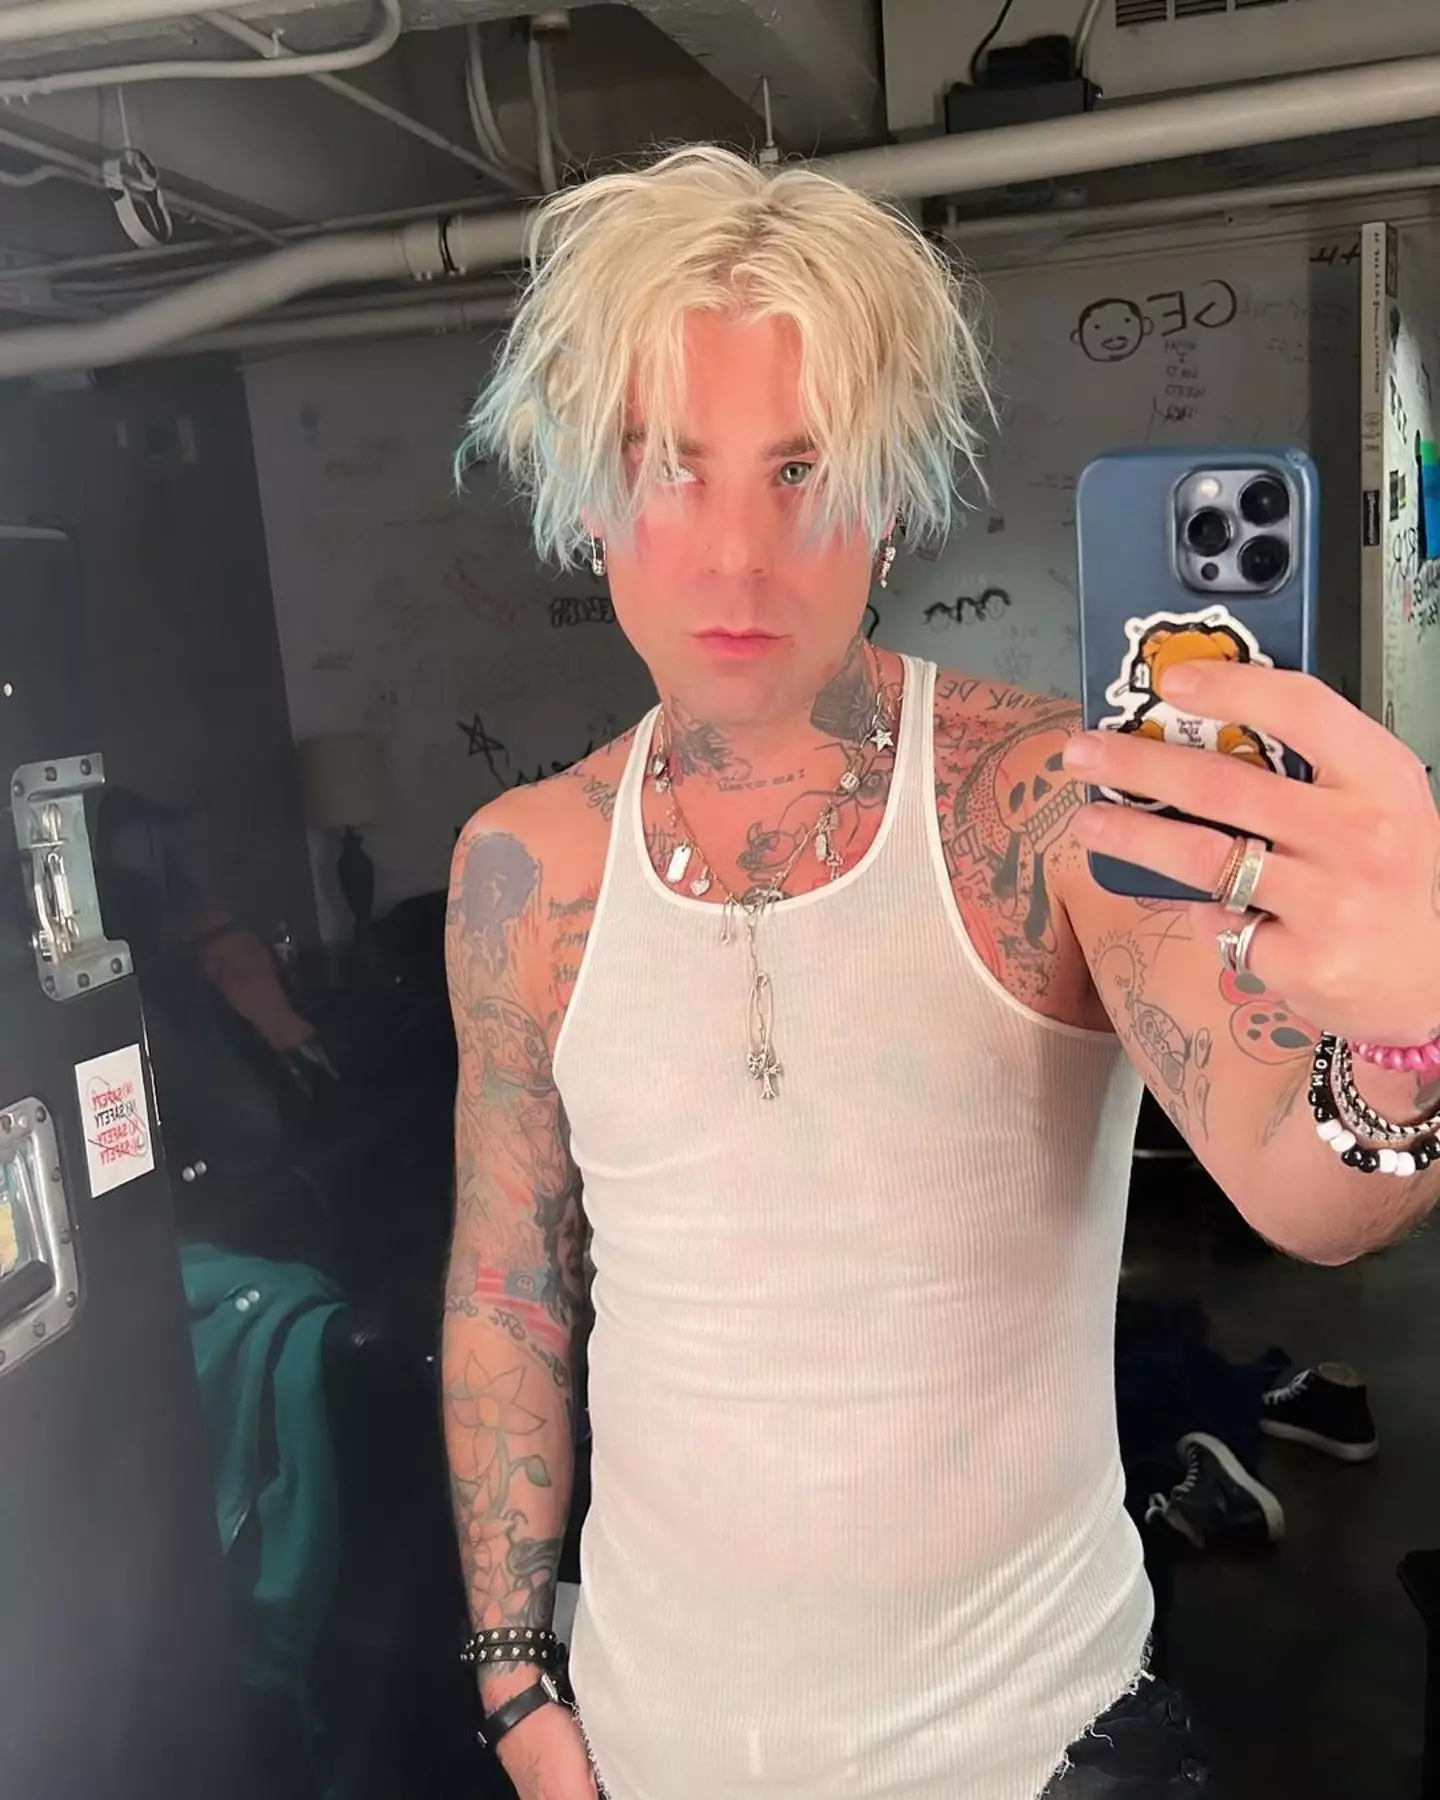 Mod Sun opened up about the split on Instagram.